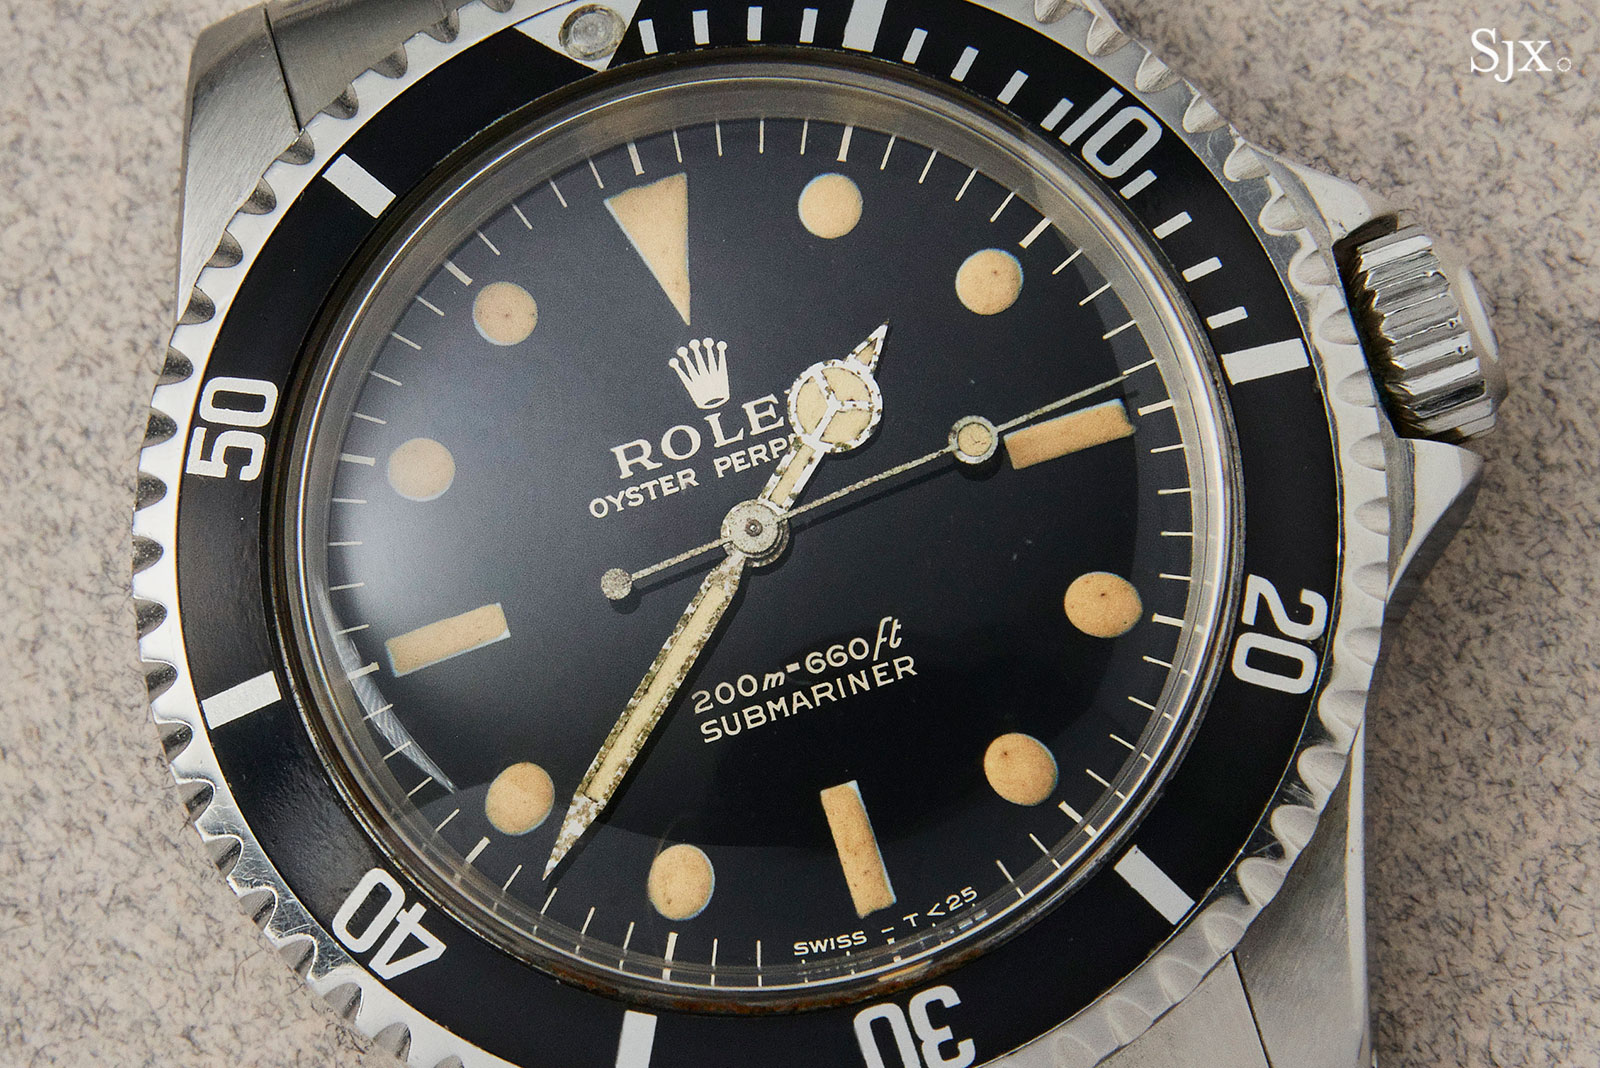 Rolex Submariner 5513 glossy dial 1